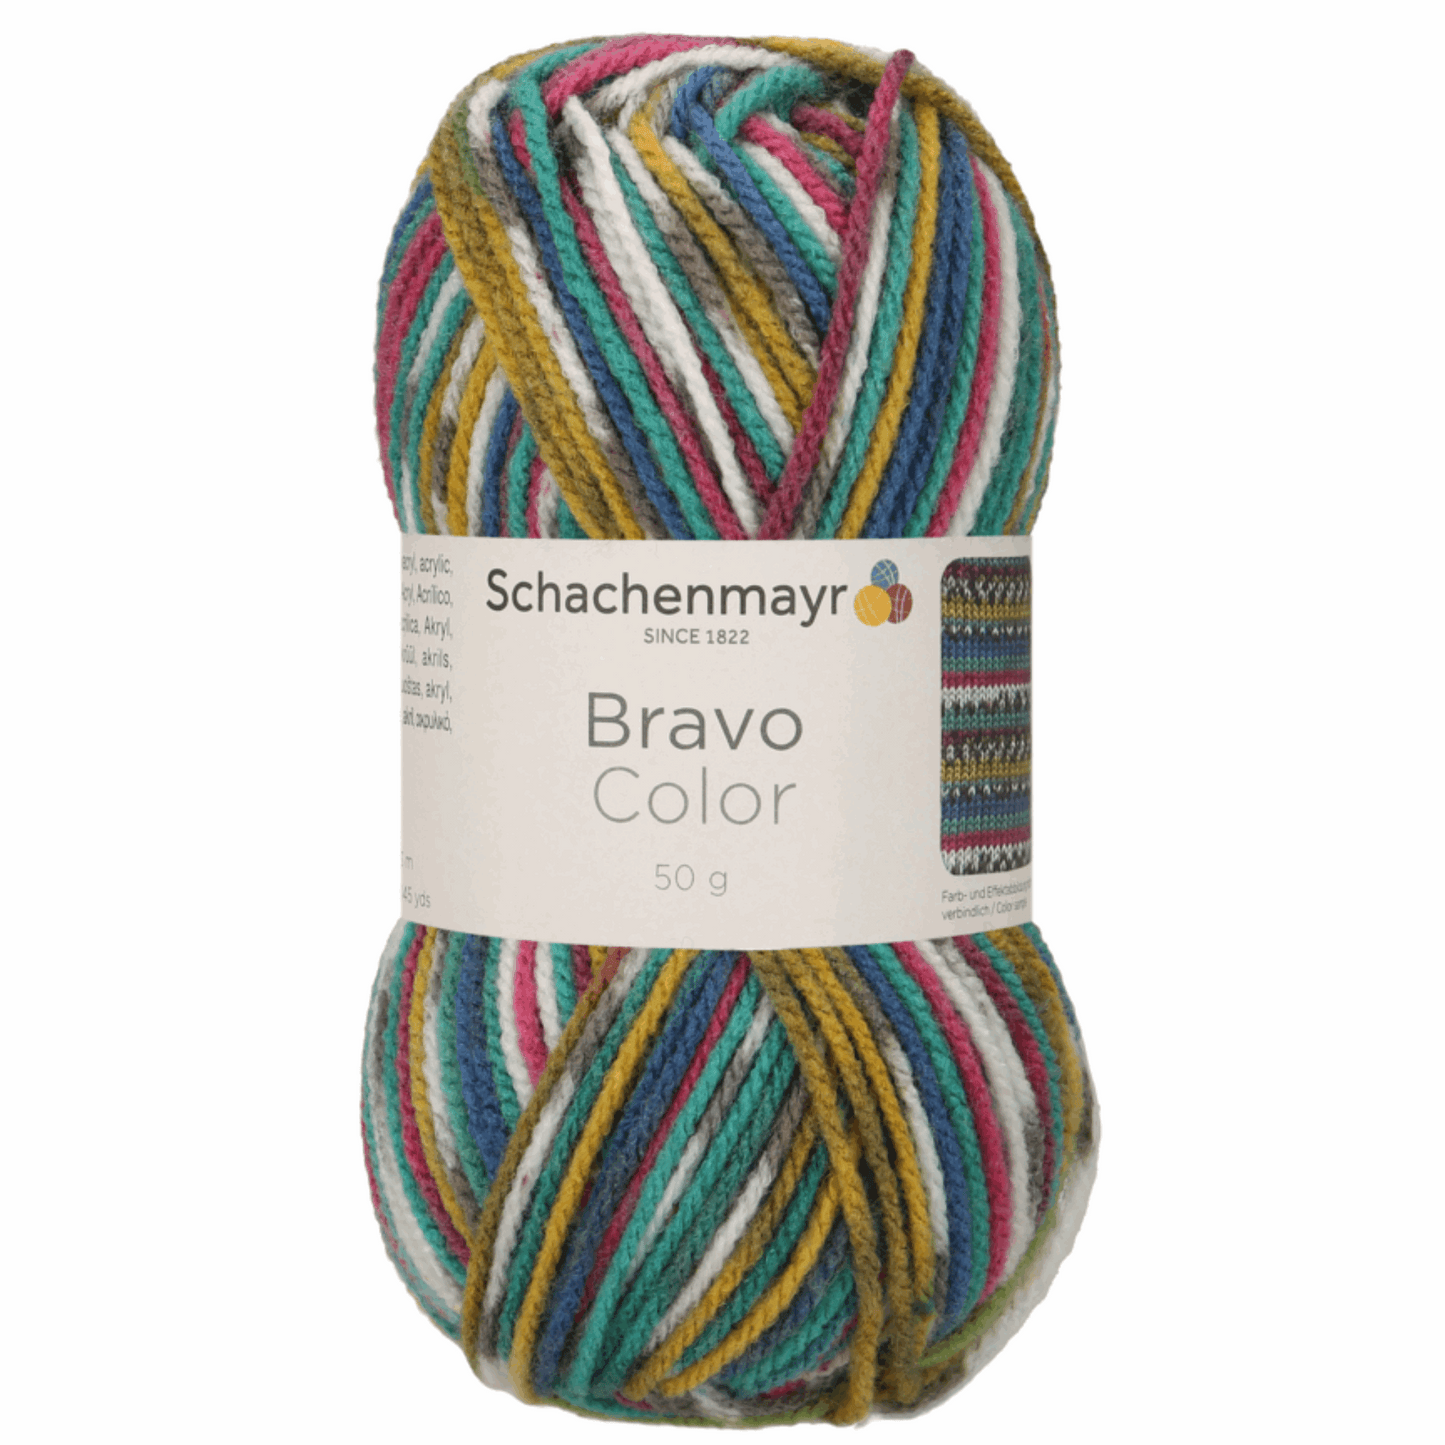 Schachenmayr Bravo Color 50g, 90421, Farbe Jeans Jacquard 2084